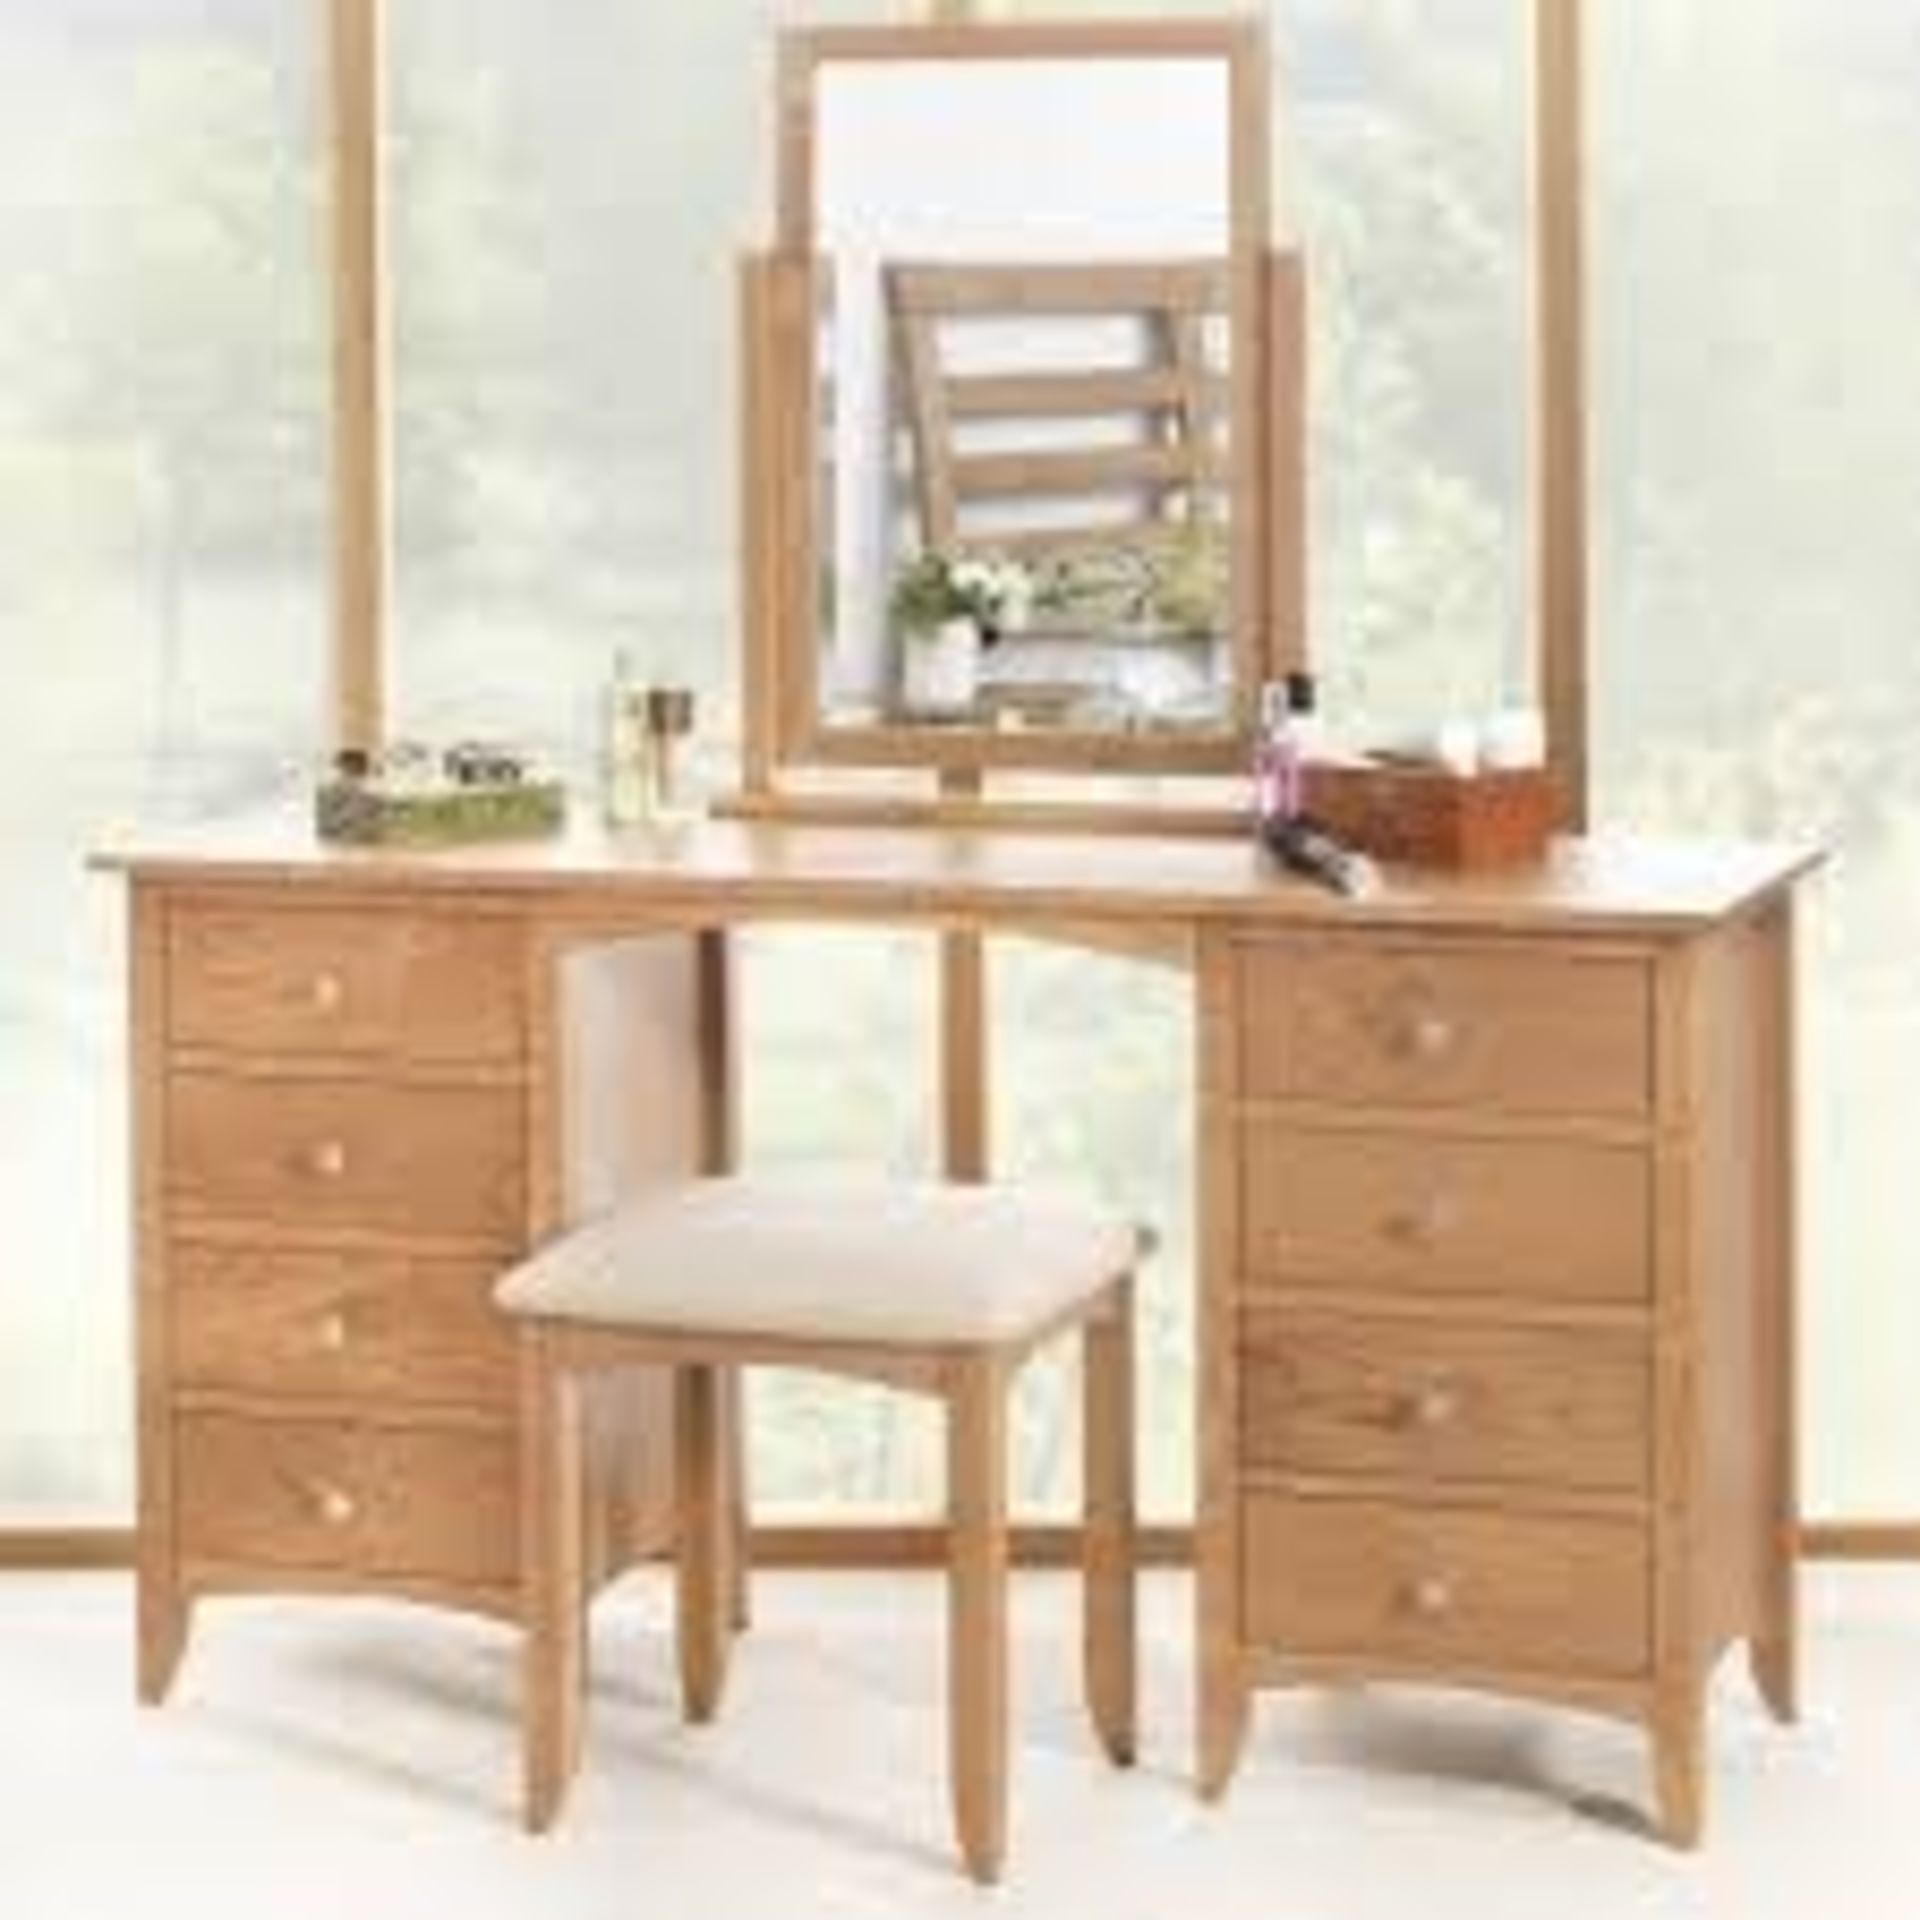 Boxed Solid Pine 8 Drawer Dressing Table RRP £400. IMAGES ARE FOR ILLUSTRATION PURPOSES ONLY AND MAY